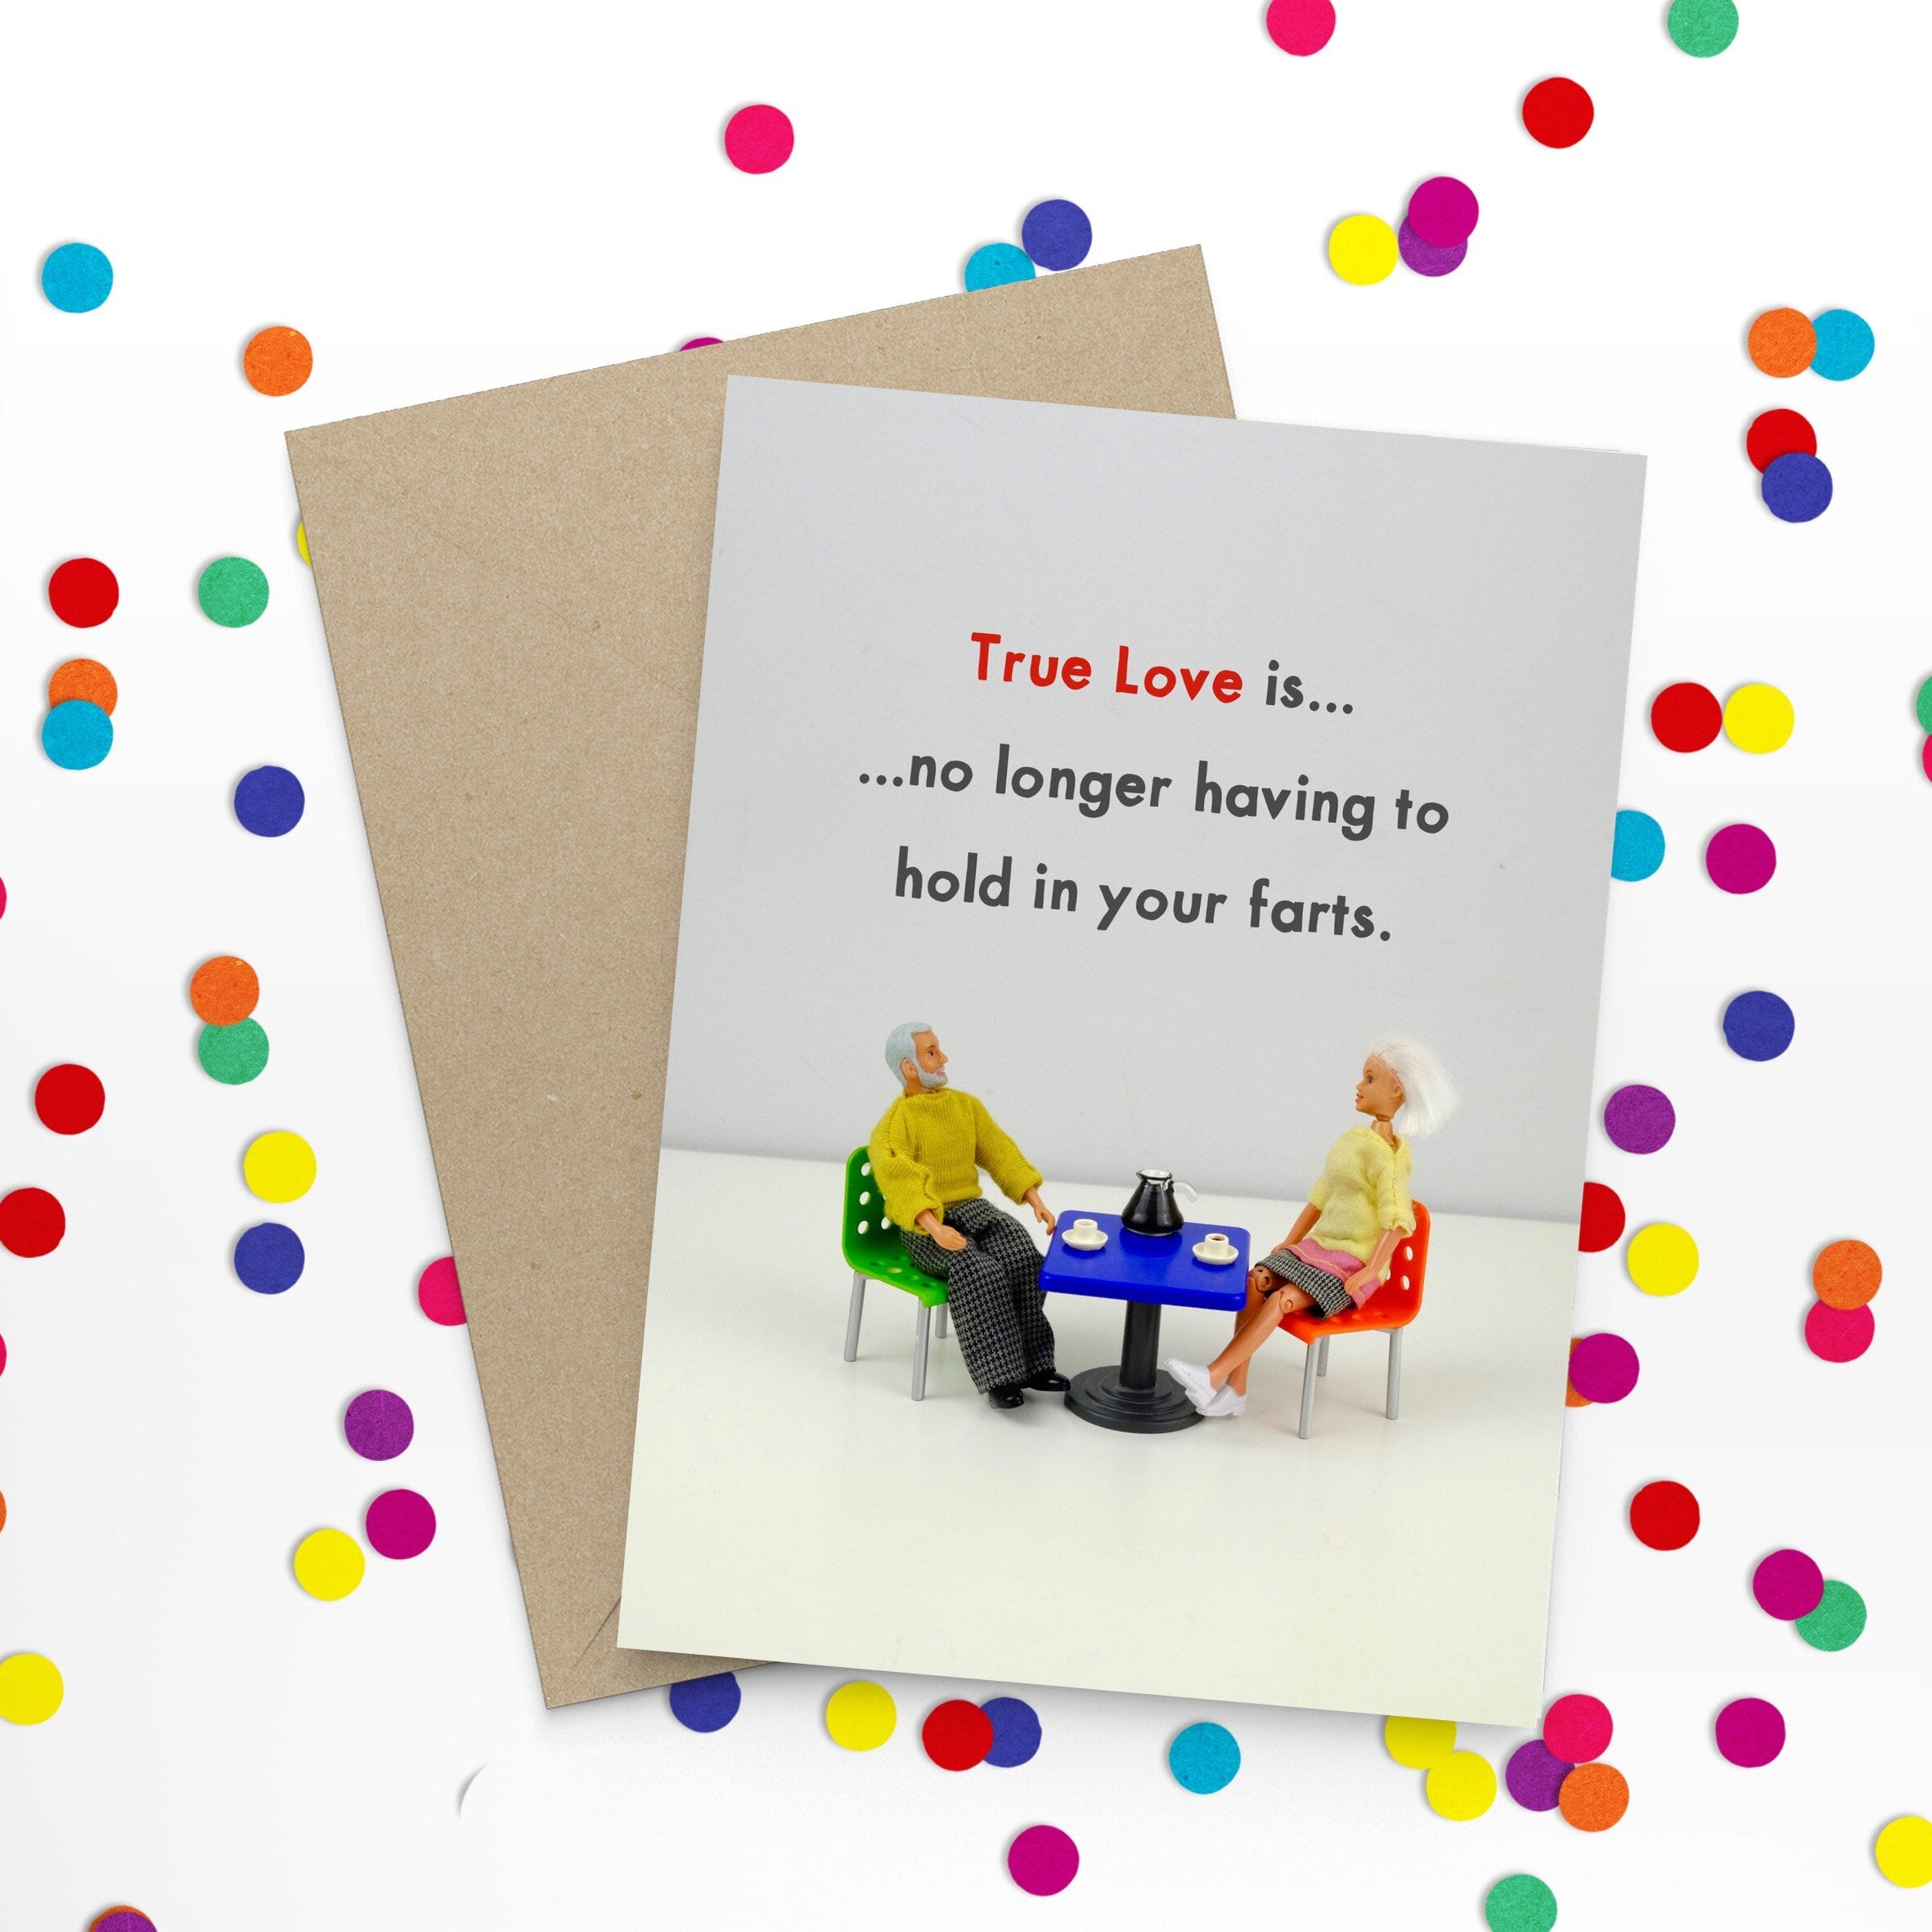 True Love Is No Longer Having To Hold In Your Farts Greetings Card by Bold and Bright